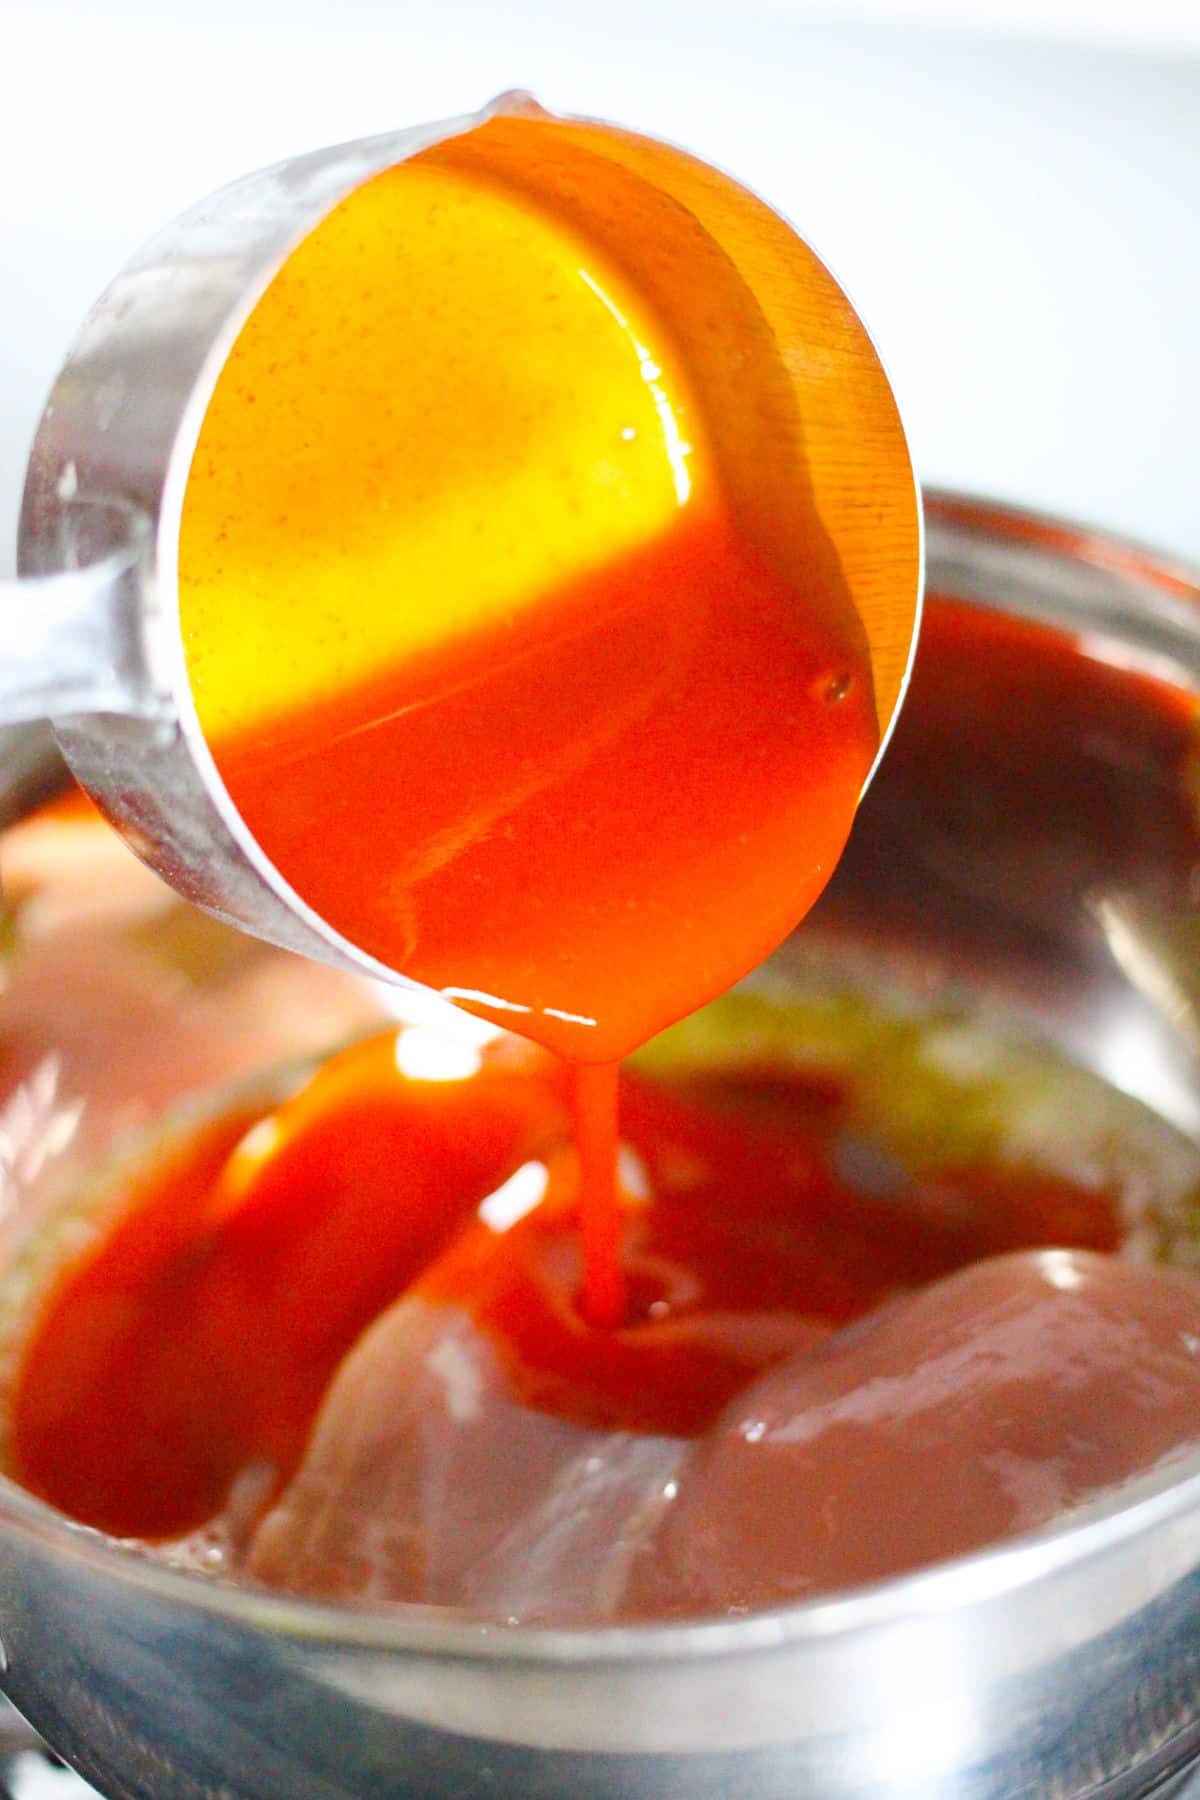 In a small pan, the buffalo sauce is being added to the chicken breasts.